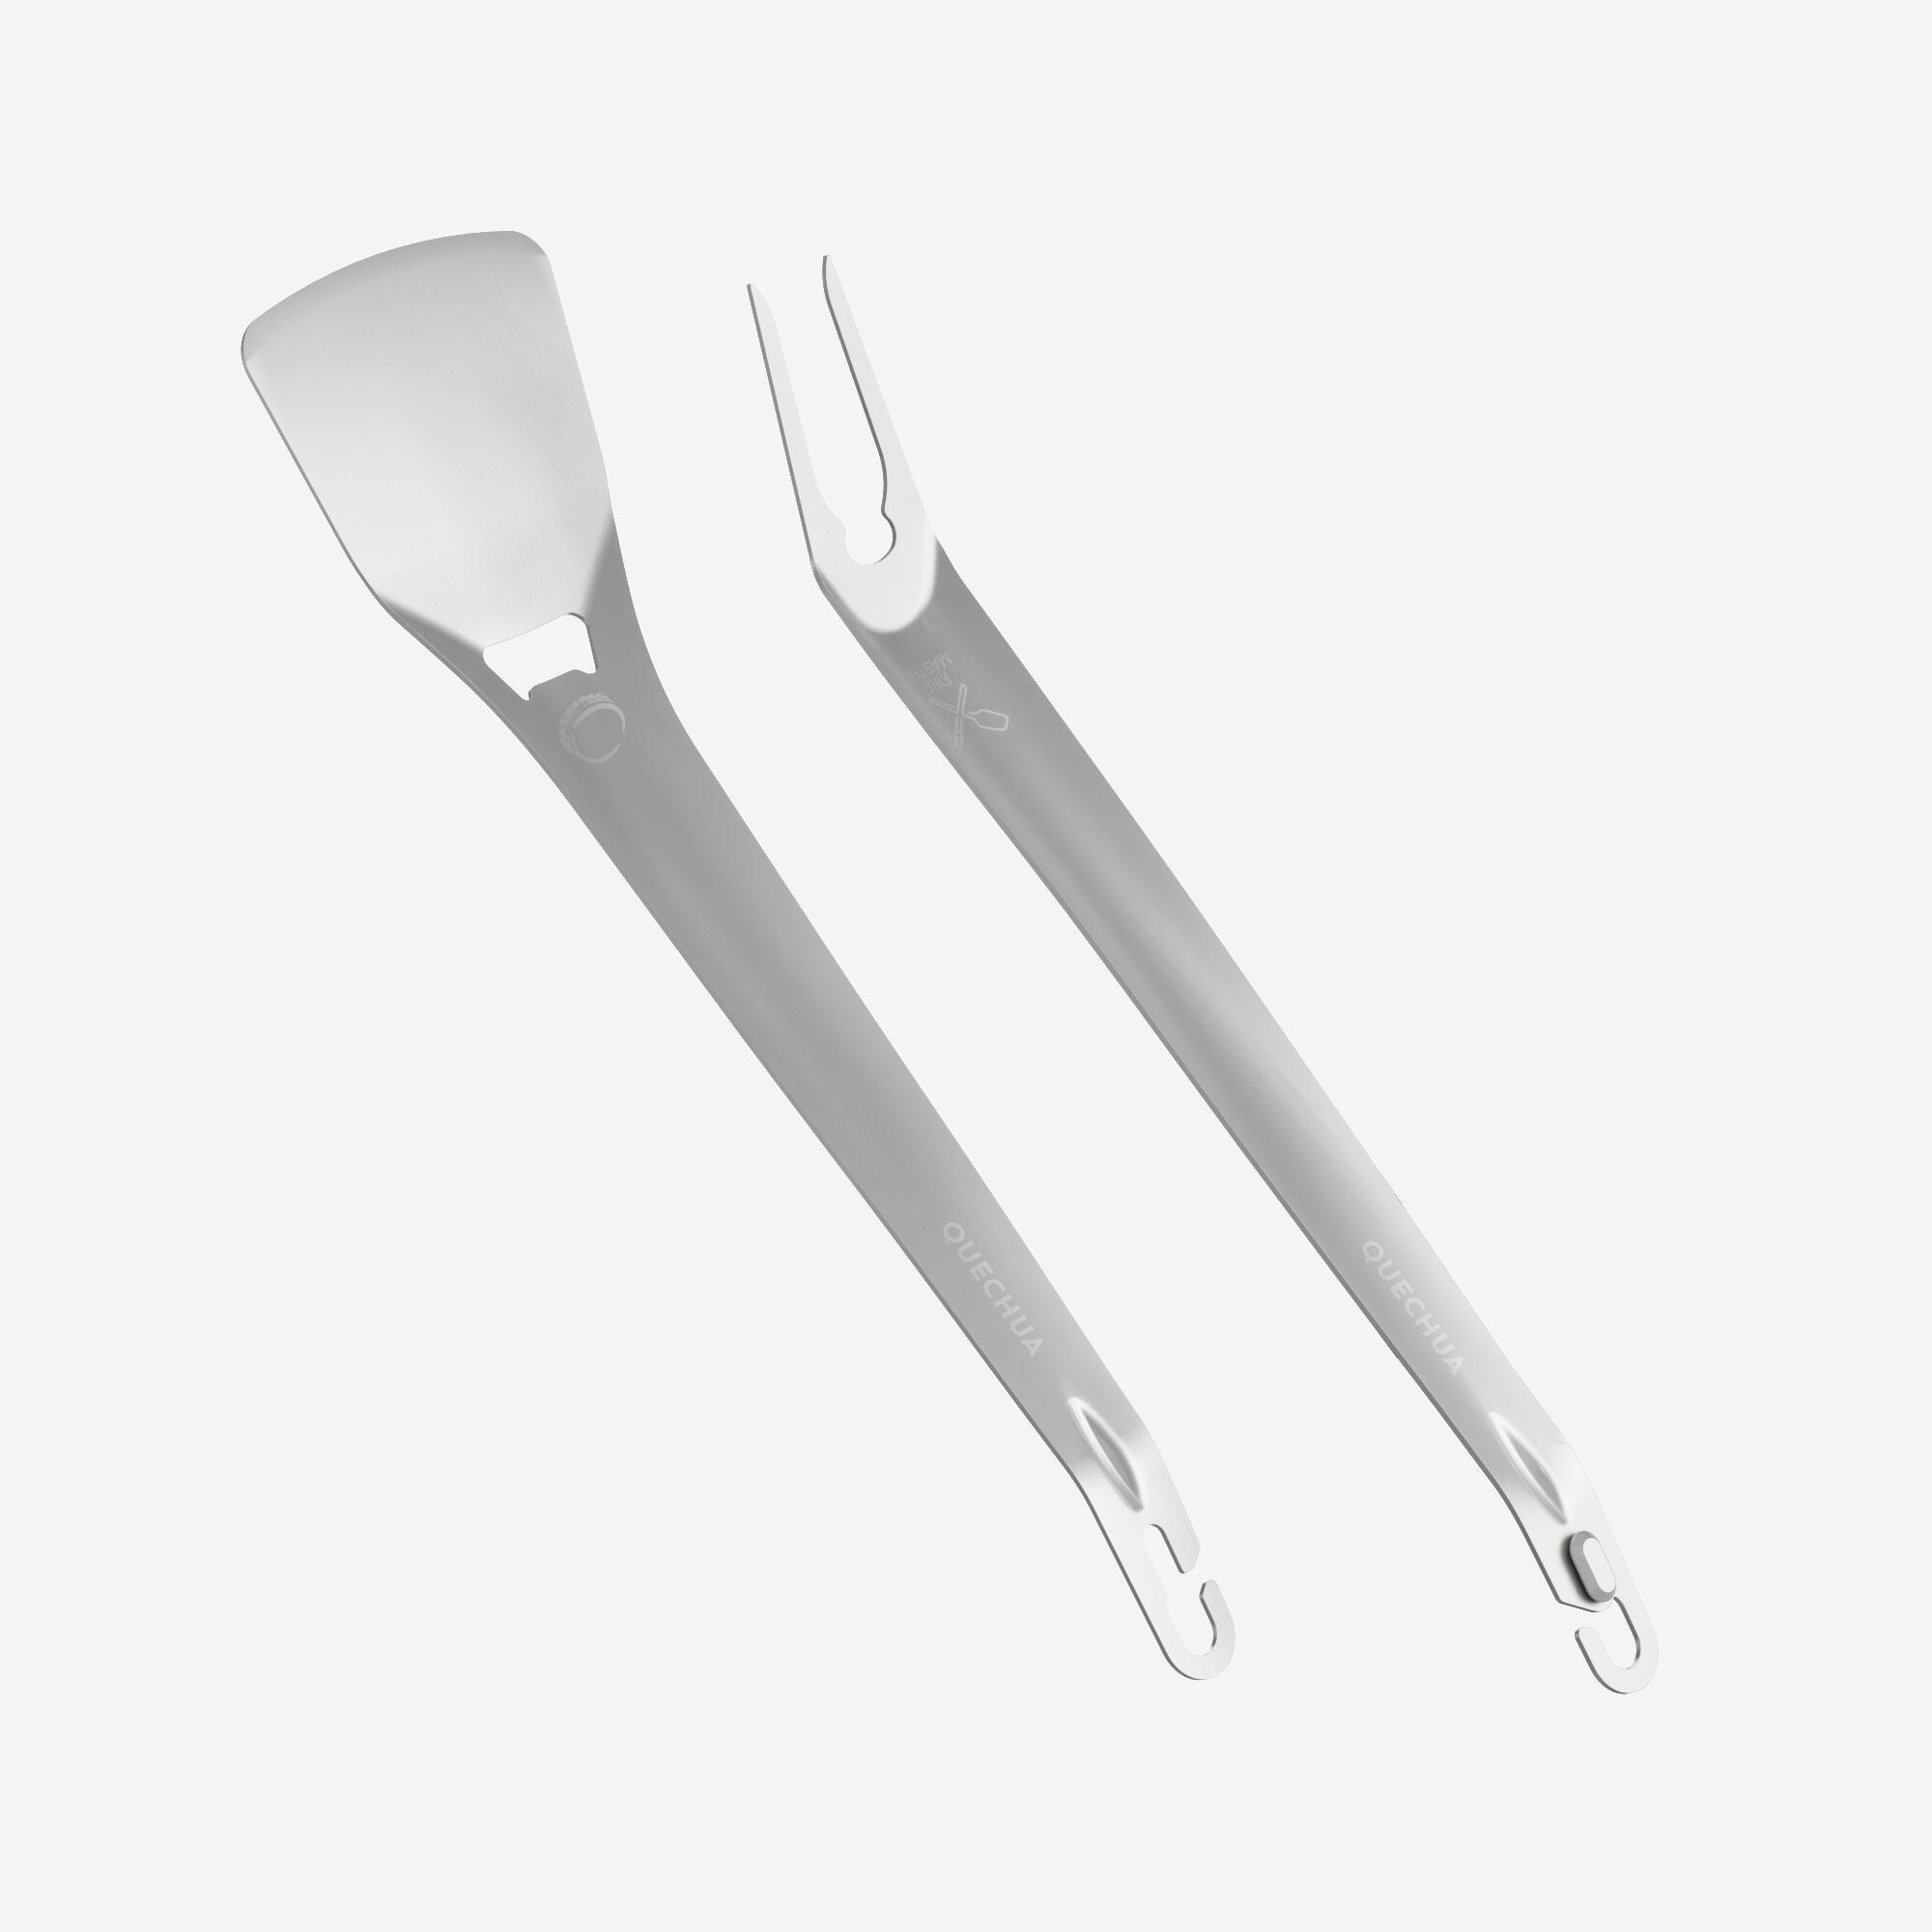 QUECHUA Set of 2 stainless-steel utensils, spatula and fork, for camping